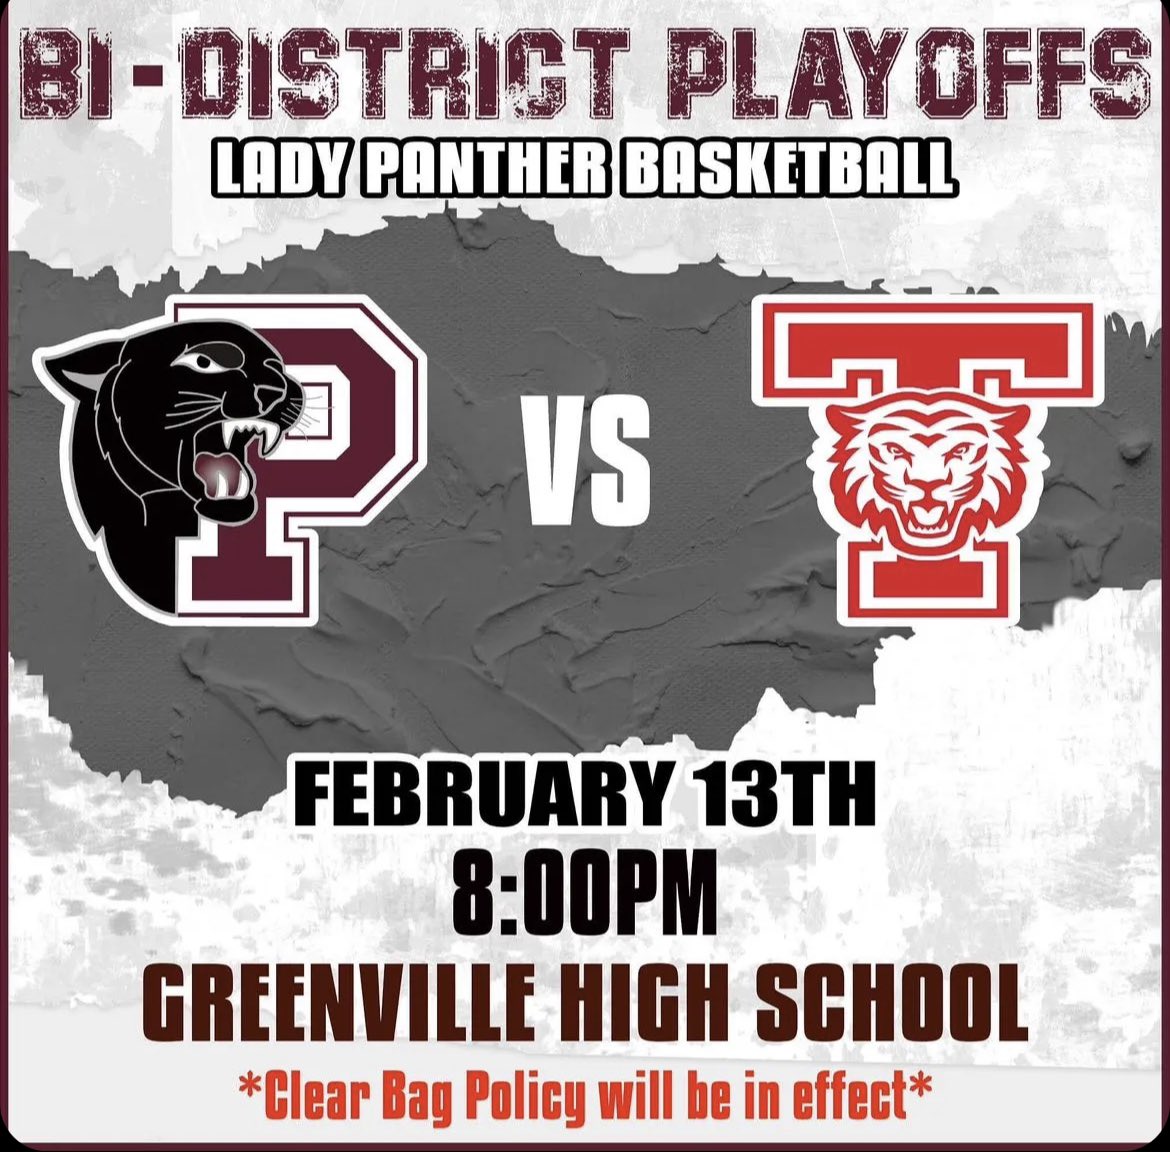 1st playoff game ‼️
Come and support your lady panthers at Greenville highschool Monday @8pm 
#letsgopanthers @PrincetonHSGBB